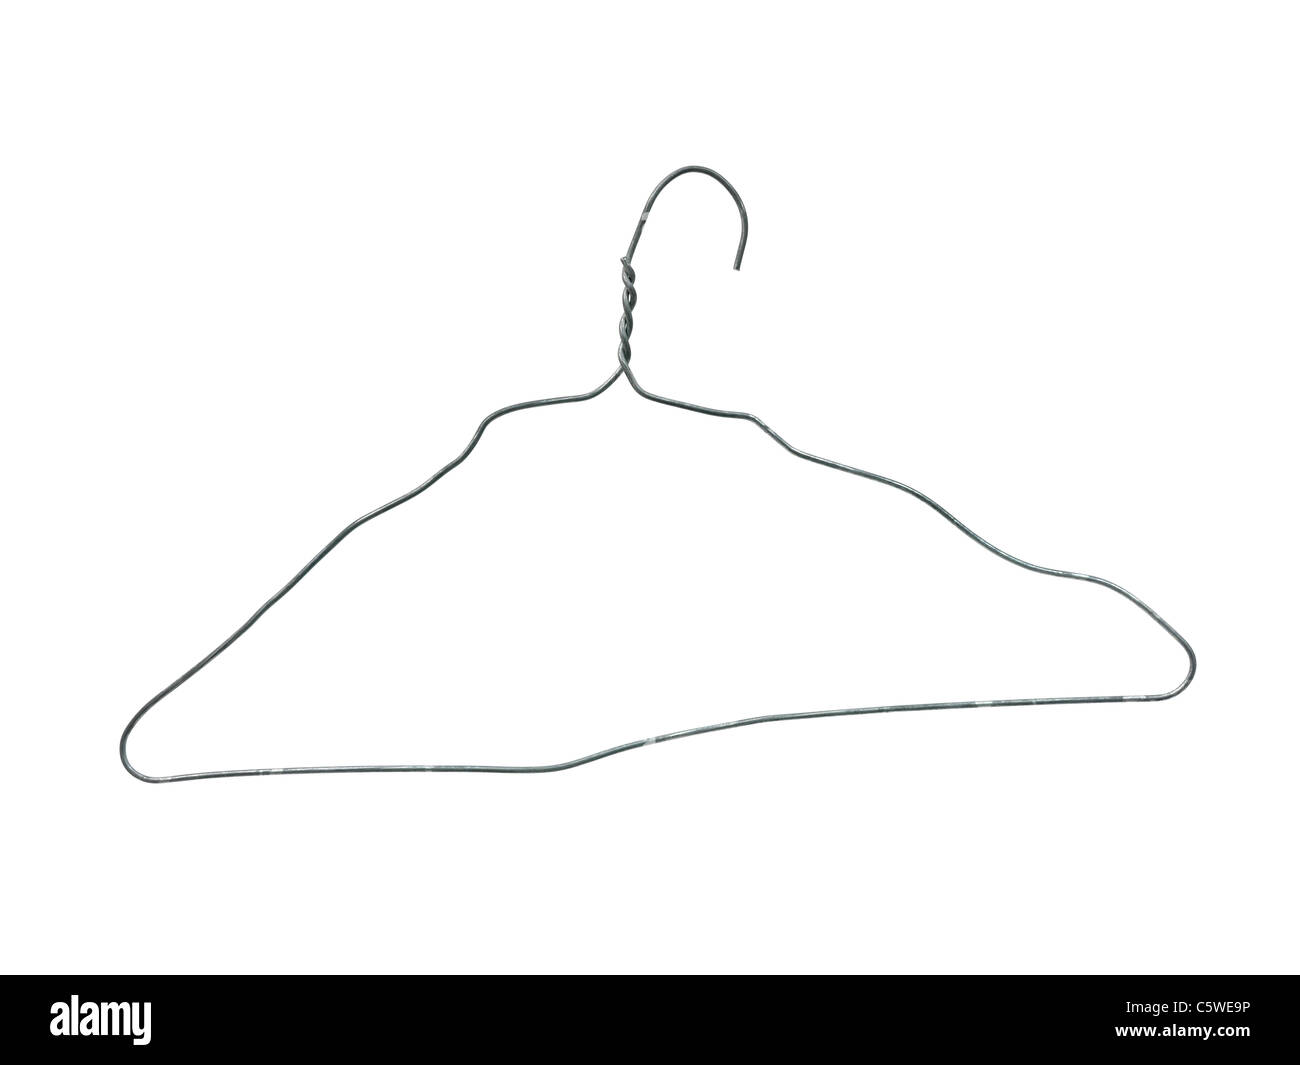 A coat hanger isolated against a white background Stock Photo